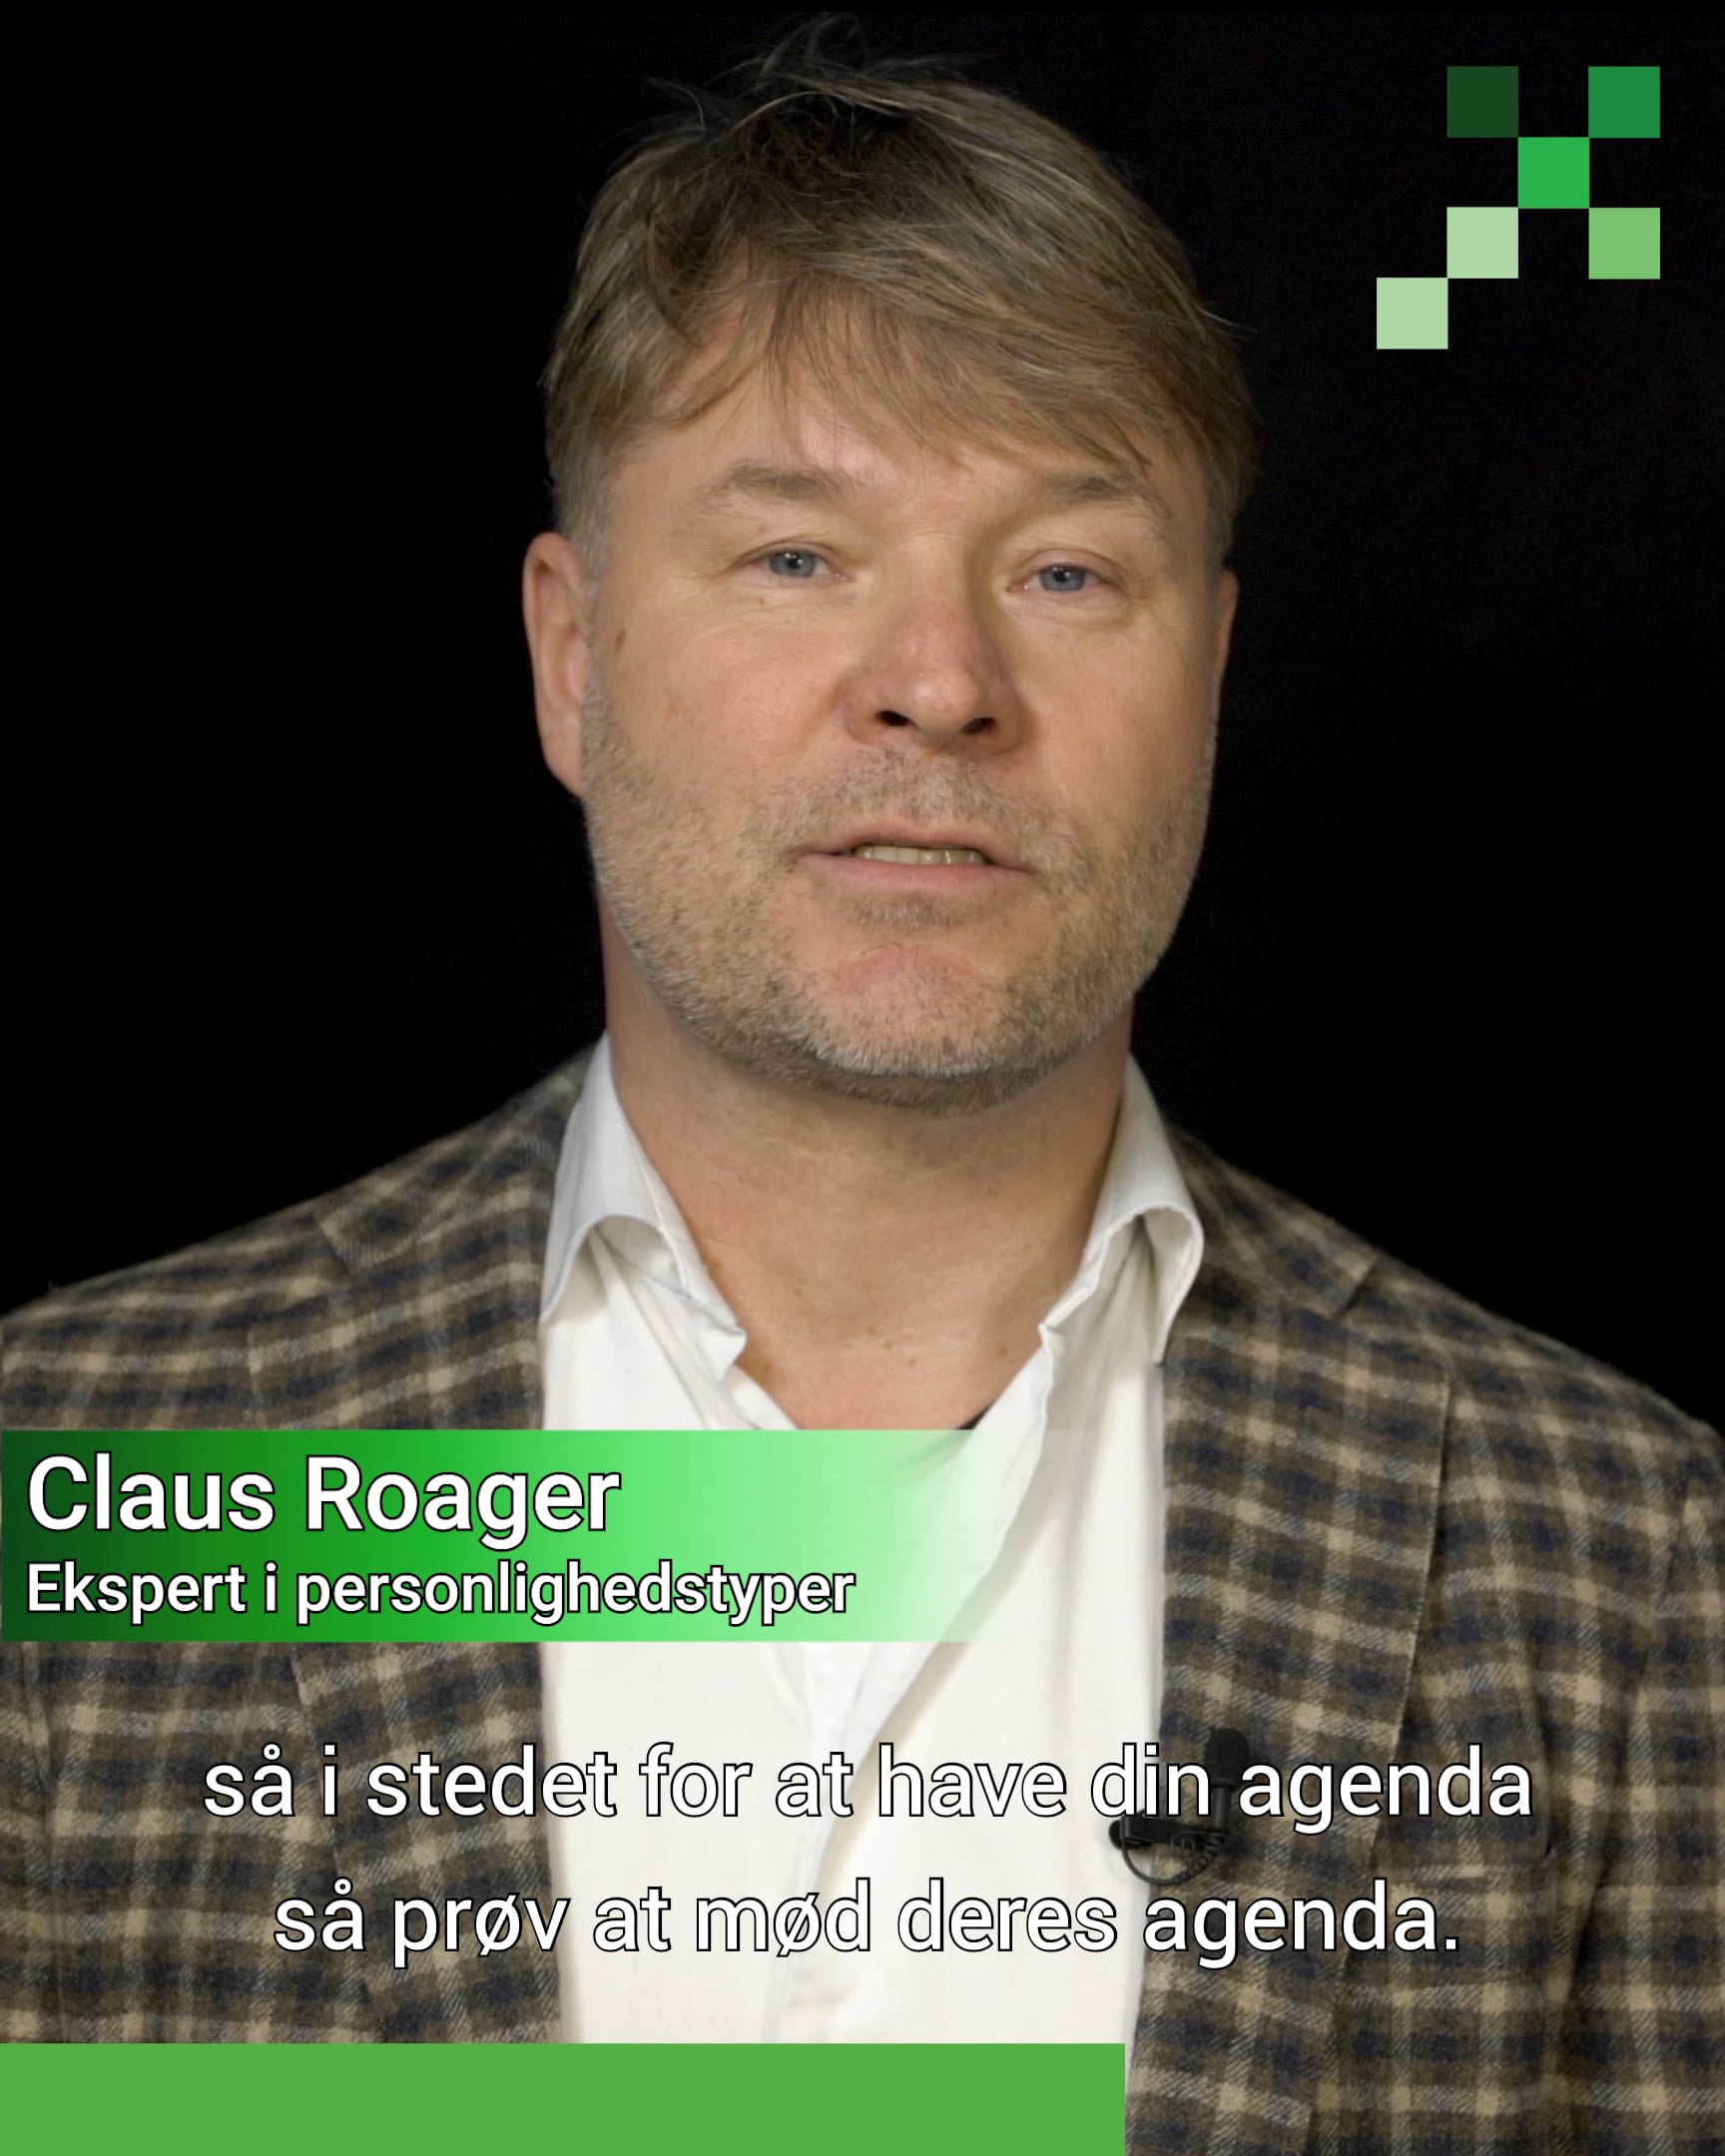 Claus Roager